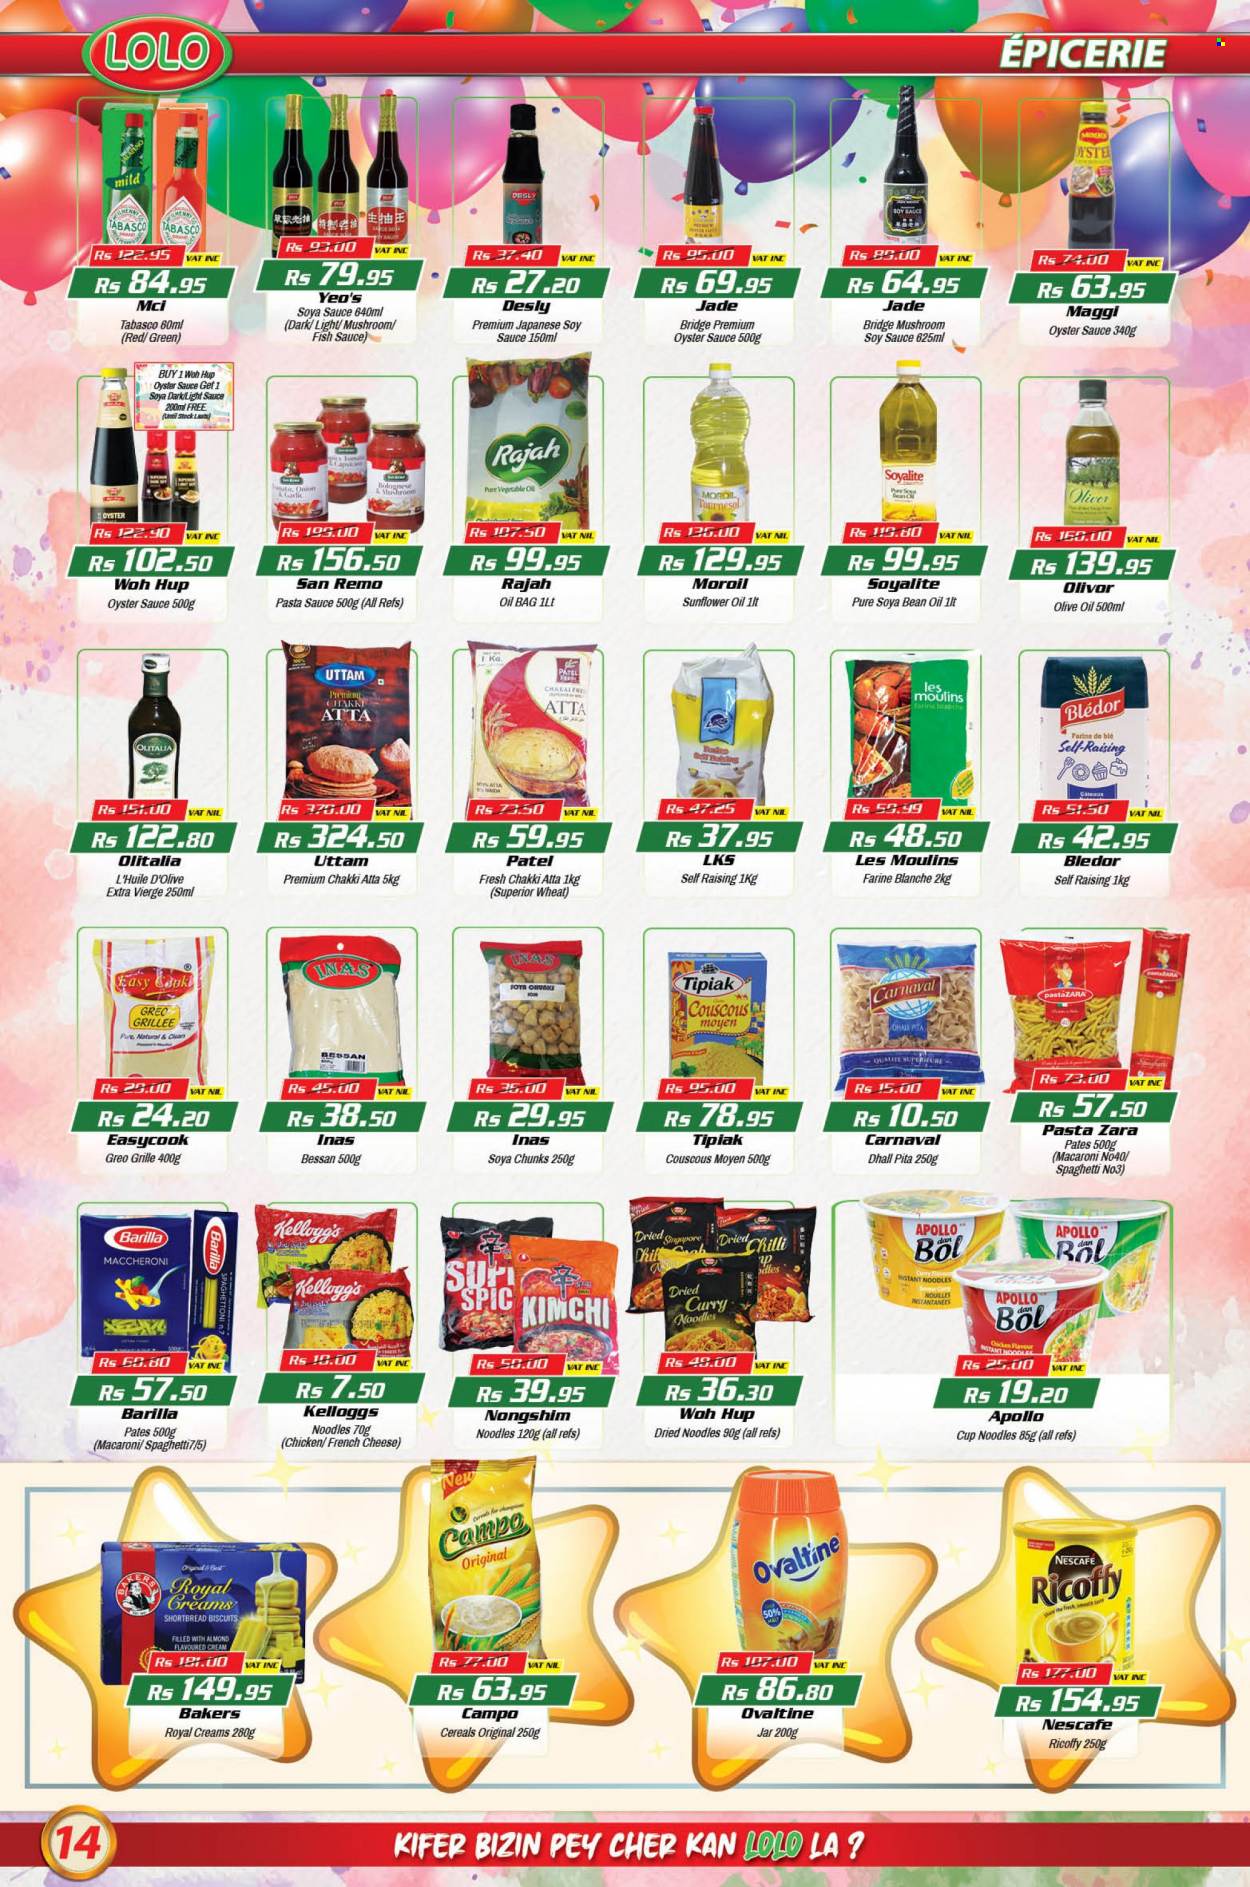 thumbnail - LOLO Hyper Catalogue - 26.07.2022 - 16.08.2022 - Sales products - pita, garlic, onion, oysters, fish, spaghetti, pasta sauce, macaroni, instant noodles, sauce, noodles cup, noodles, cheese, Kellogg's, biscuit, flour, tabasco, Maggi, cereals, soya chunks, fish sauce, soy sauce, oyster sauce, sunflower oil, olive oil, oil, Ricoffy, jar, Bakers, couscous, Nescafé, Barilla. Page 14.